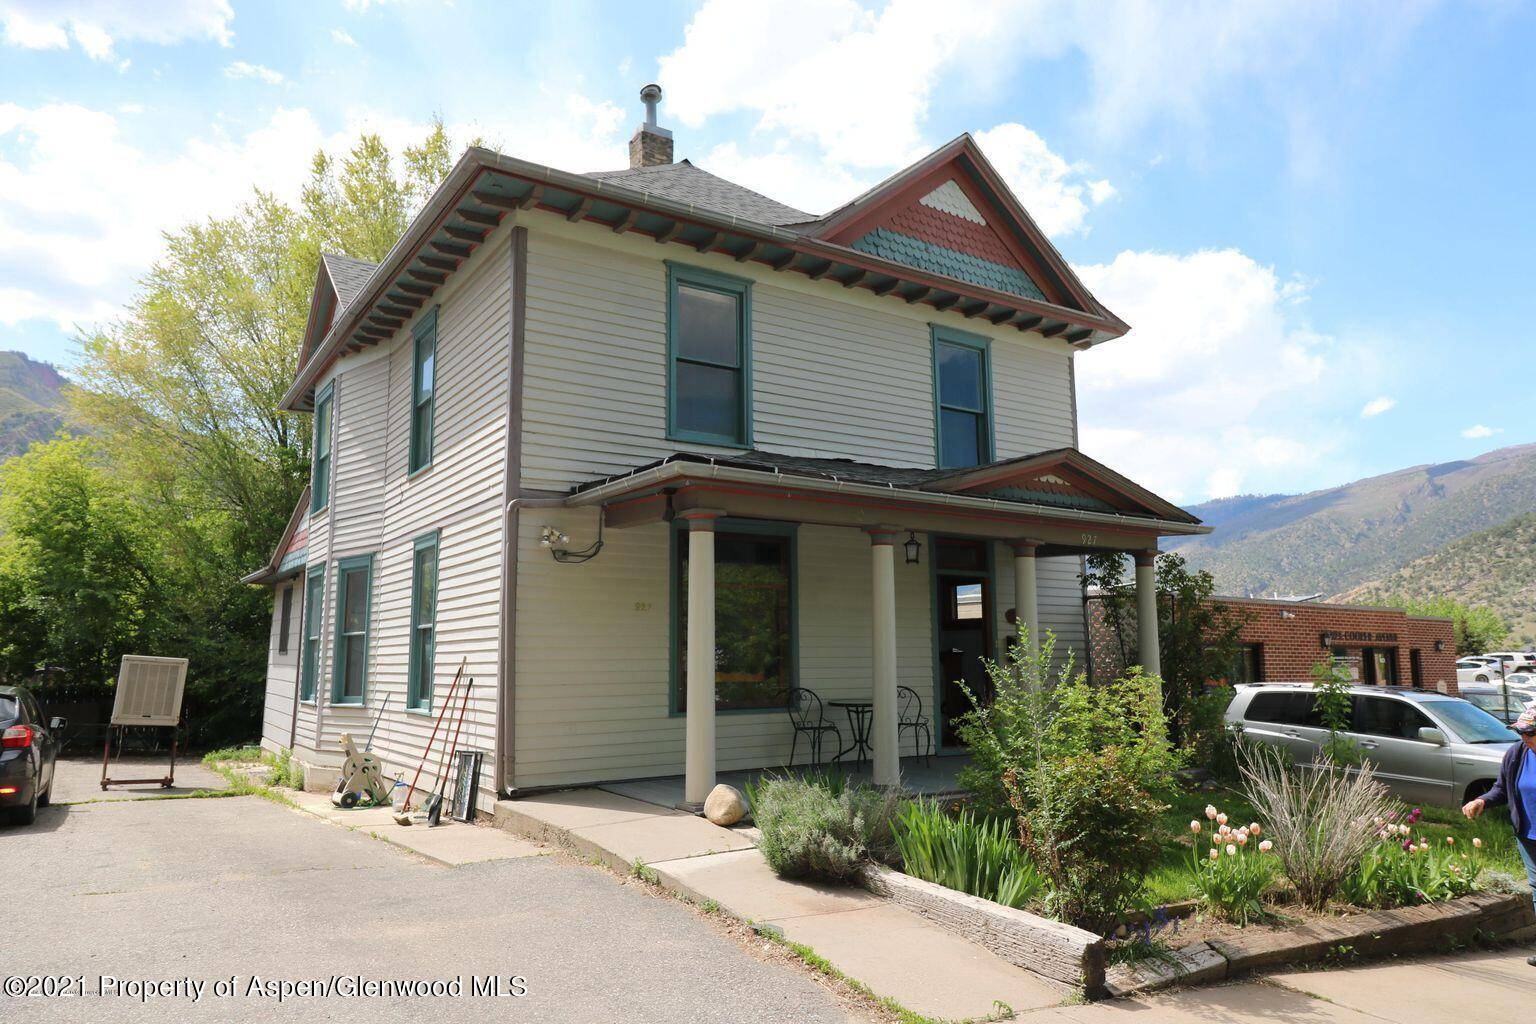 Great Victorian style home located near downtown Glenwood Springs.